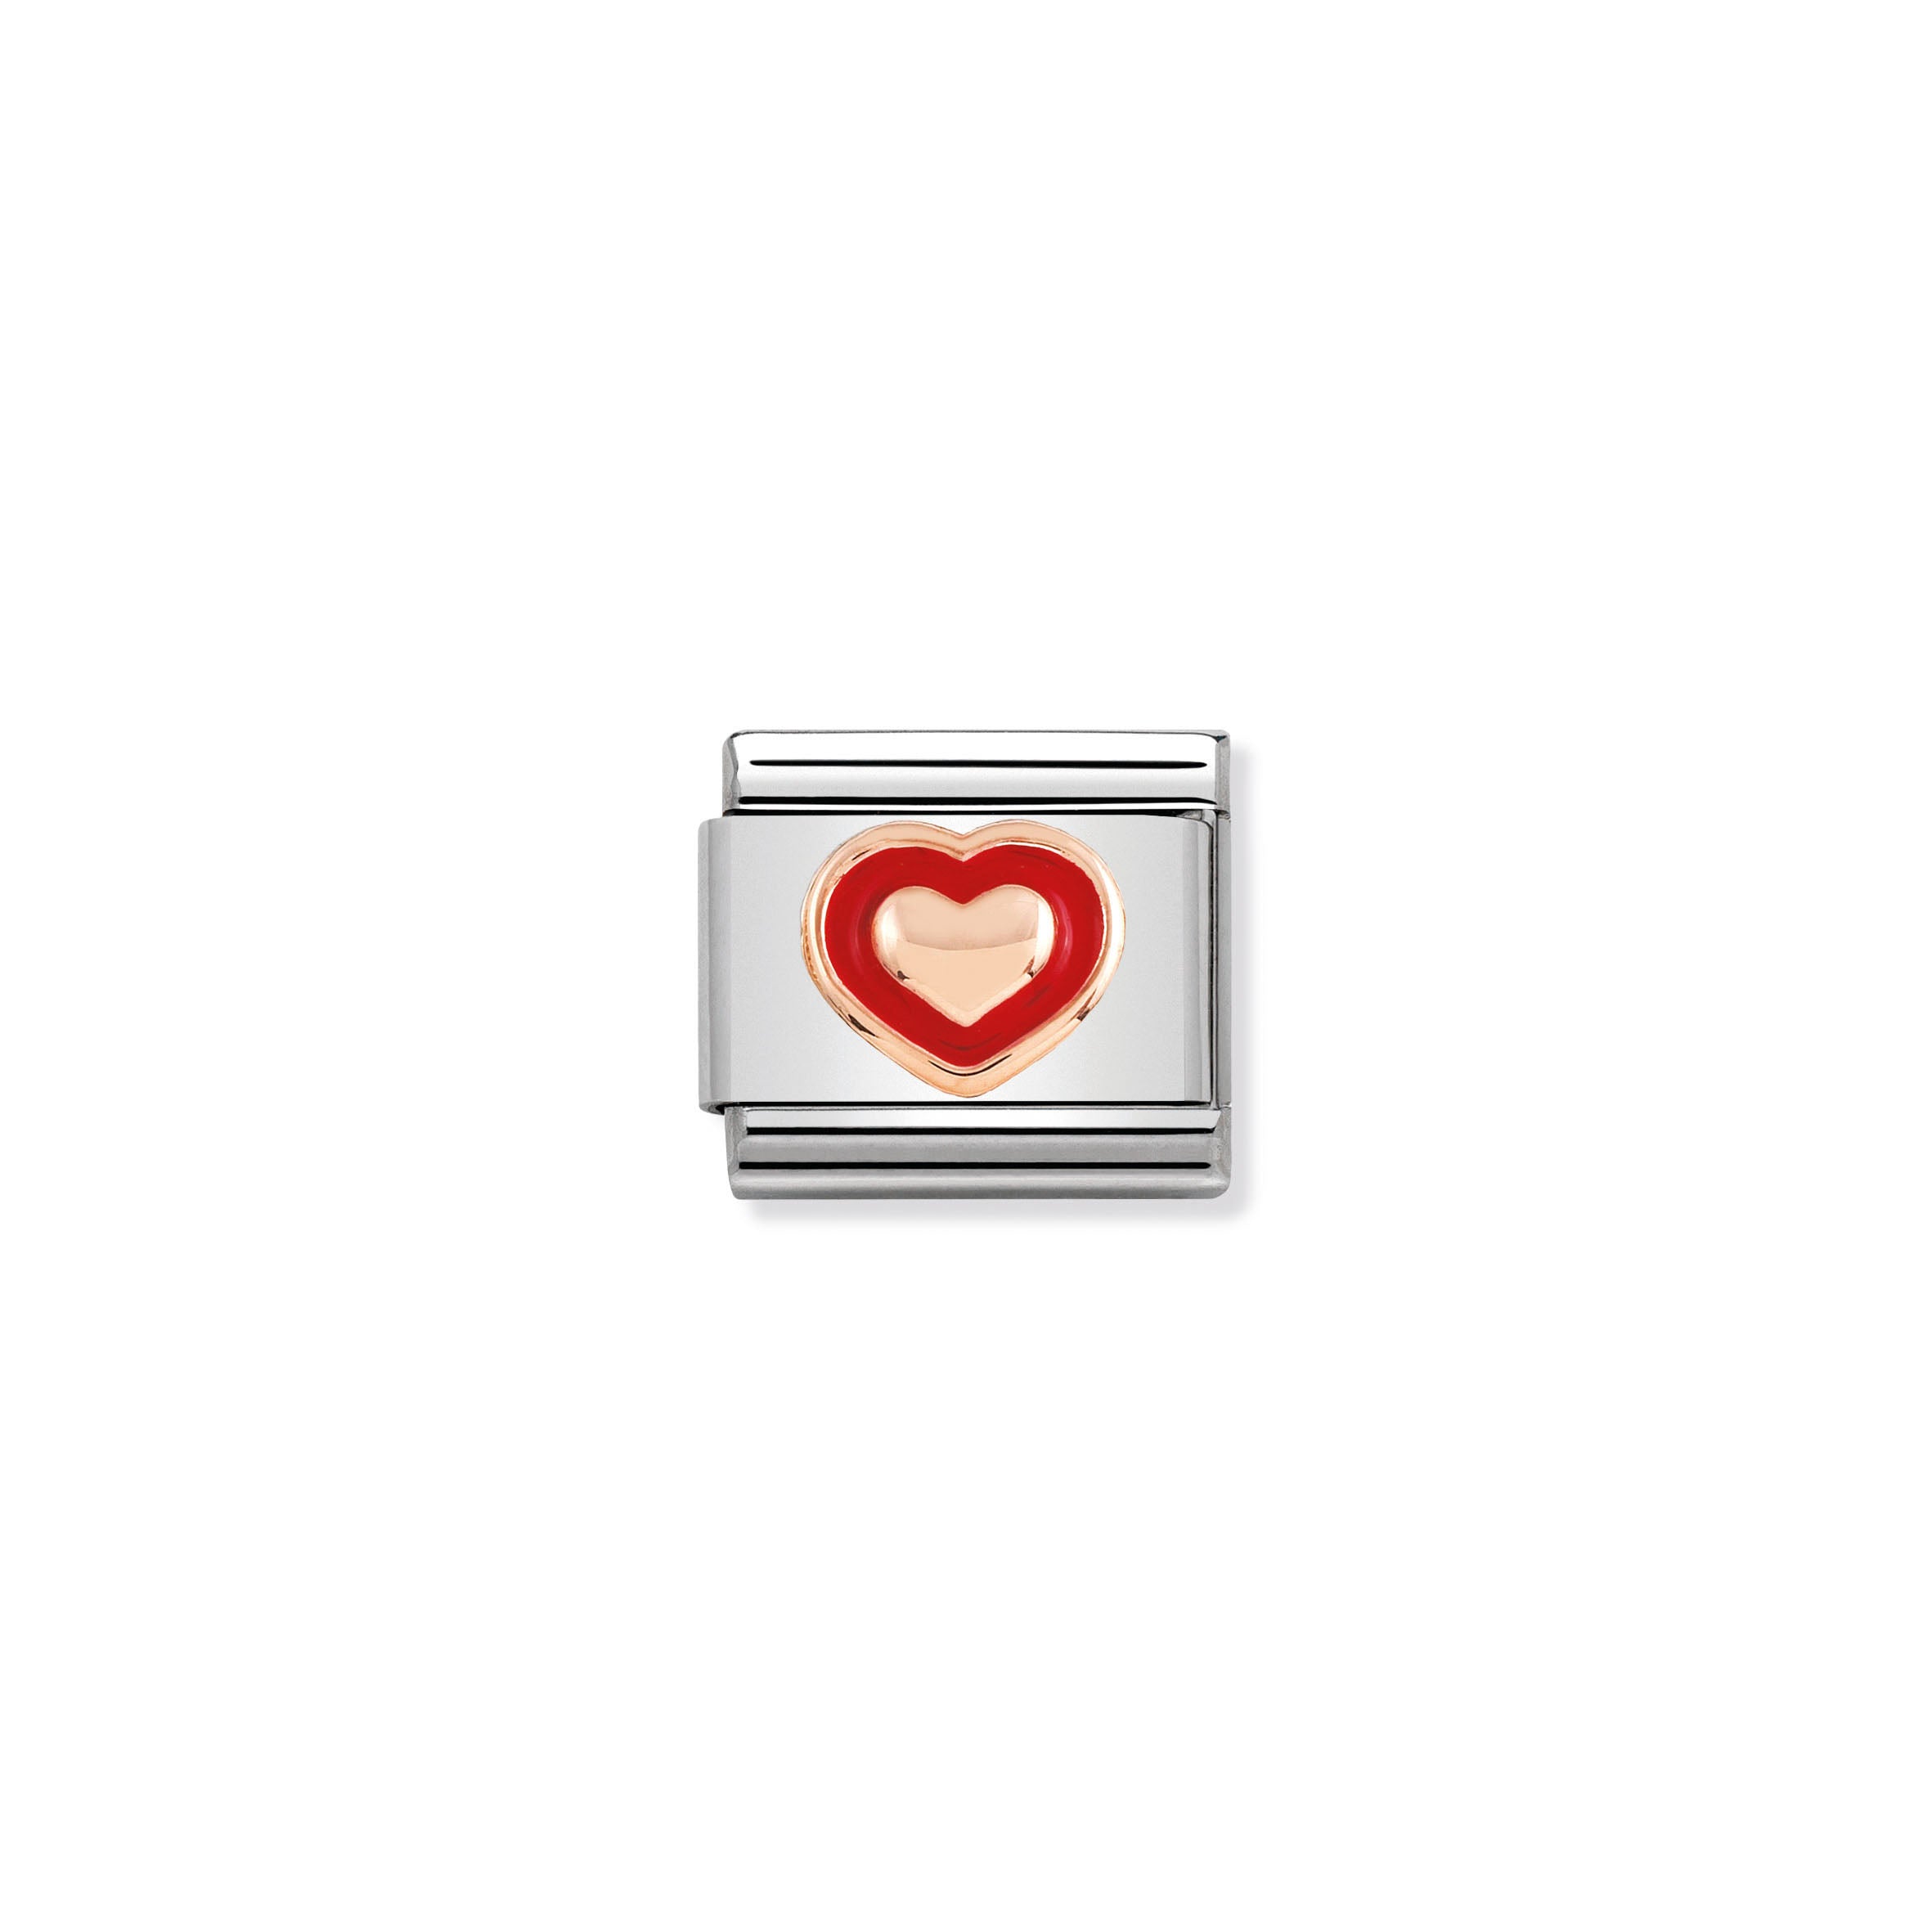 NOMINATION - Composable Classic RELIEF SYMBOLS st/steel, enamel & 9ct rose gold (Heart with Red Border)